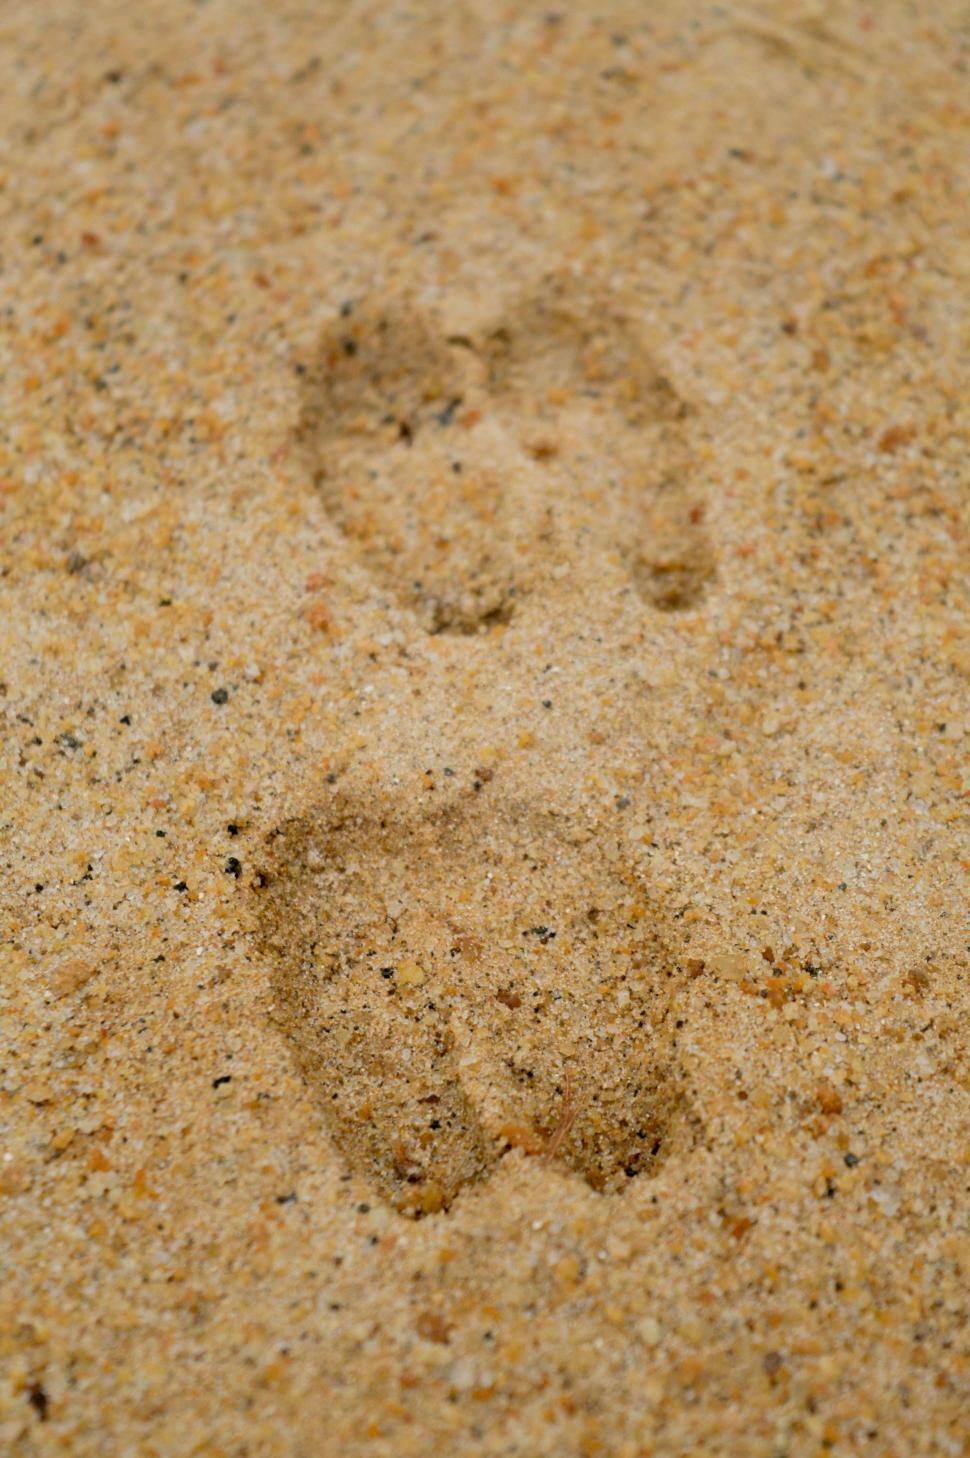 Free Image of Birds Footprints in the Sand on a Beach 